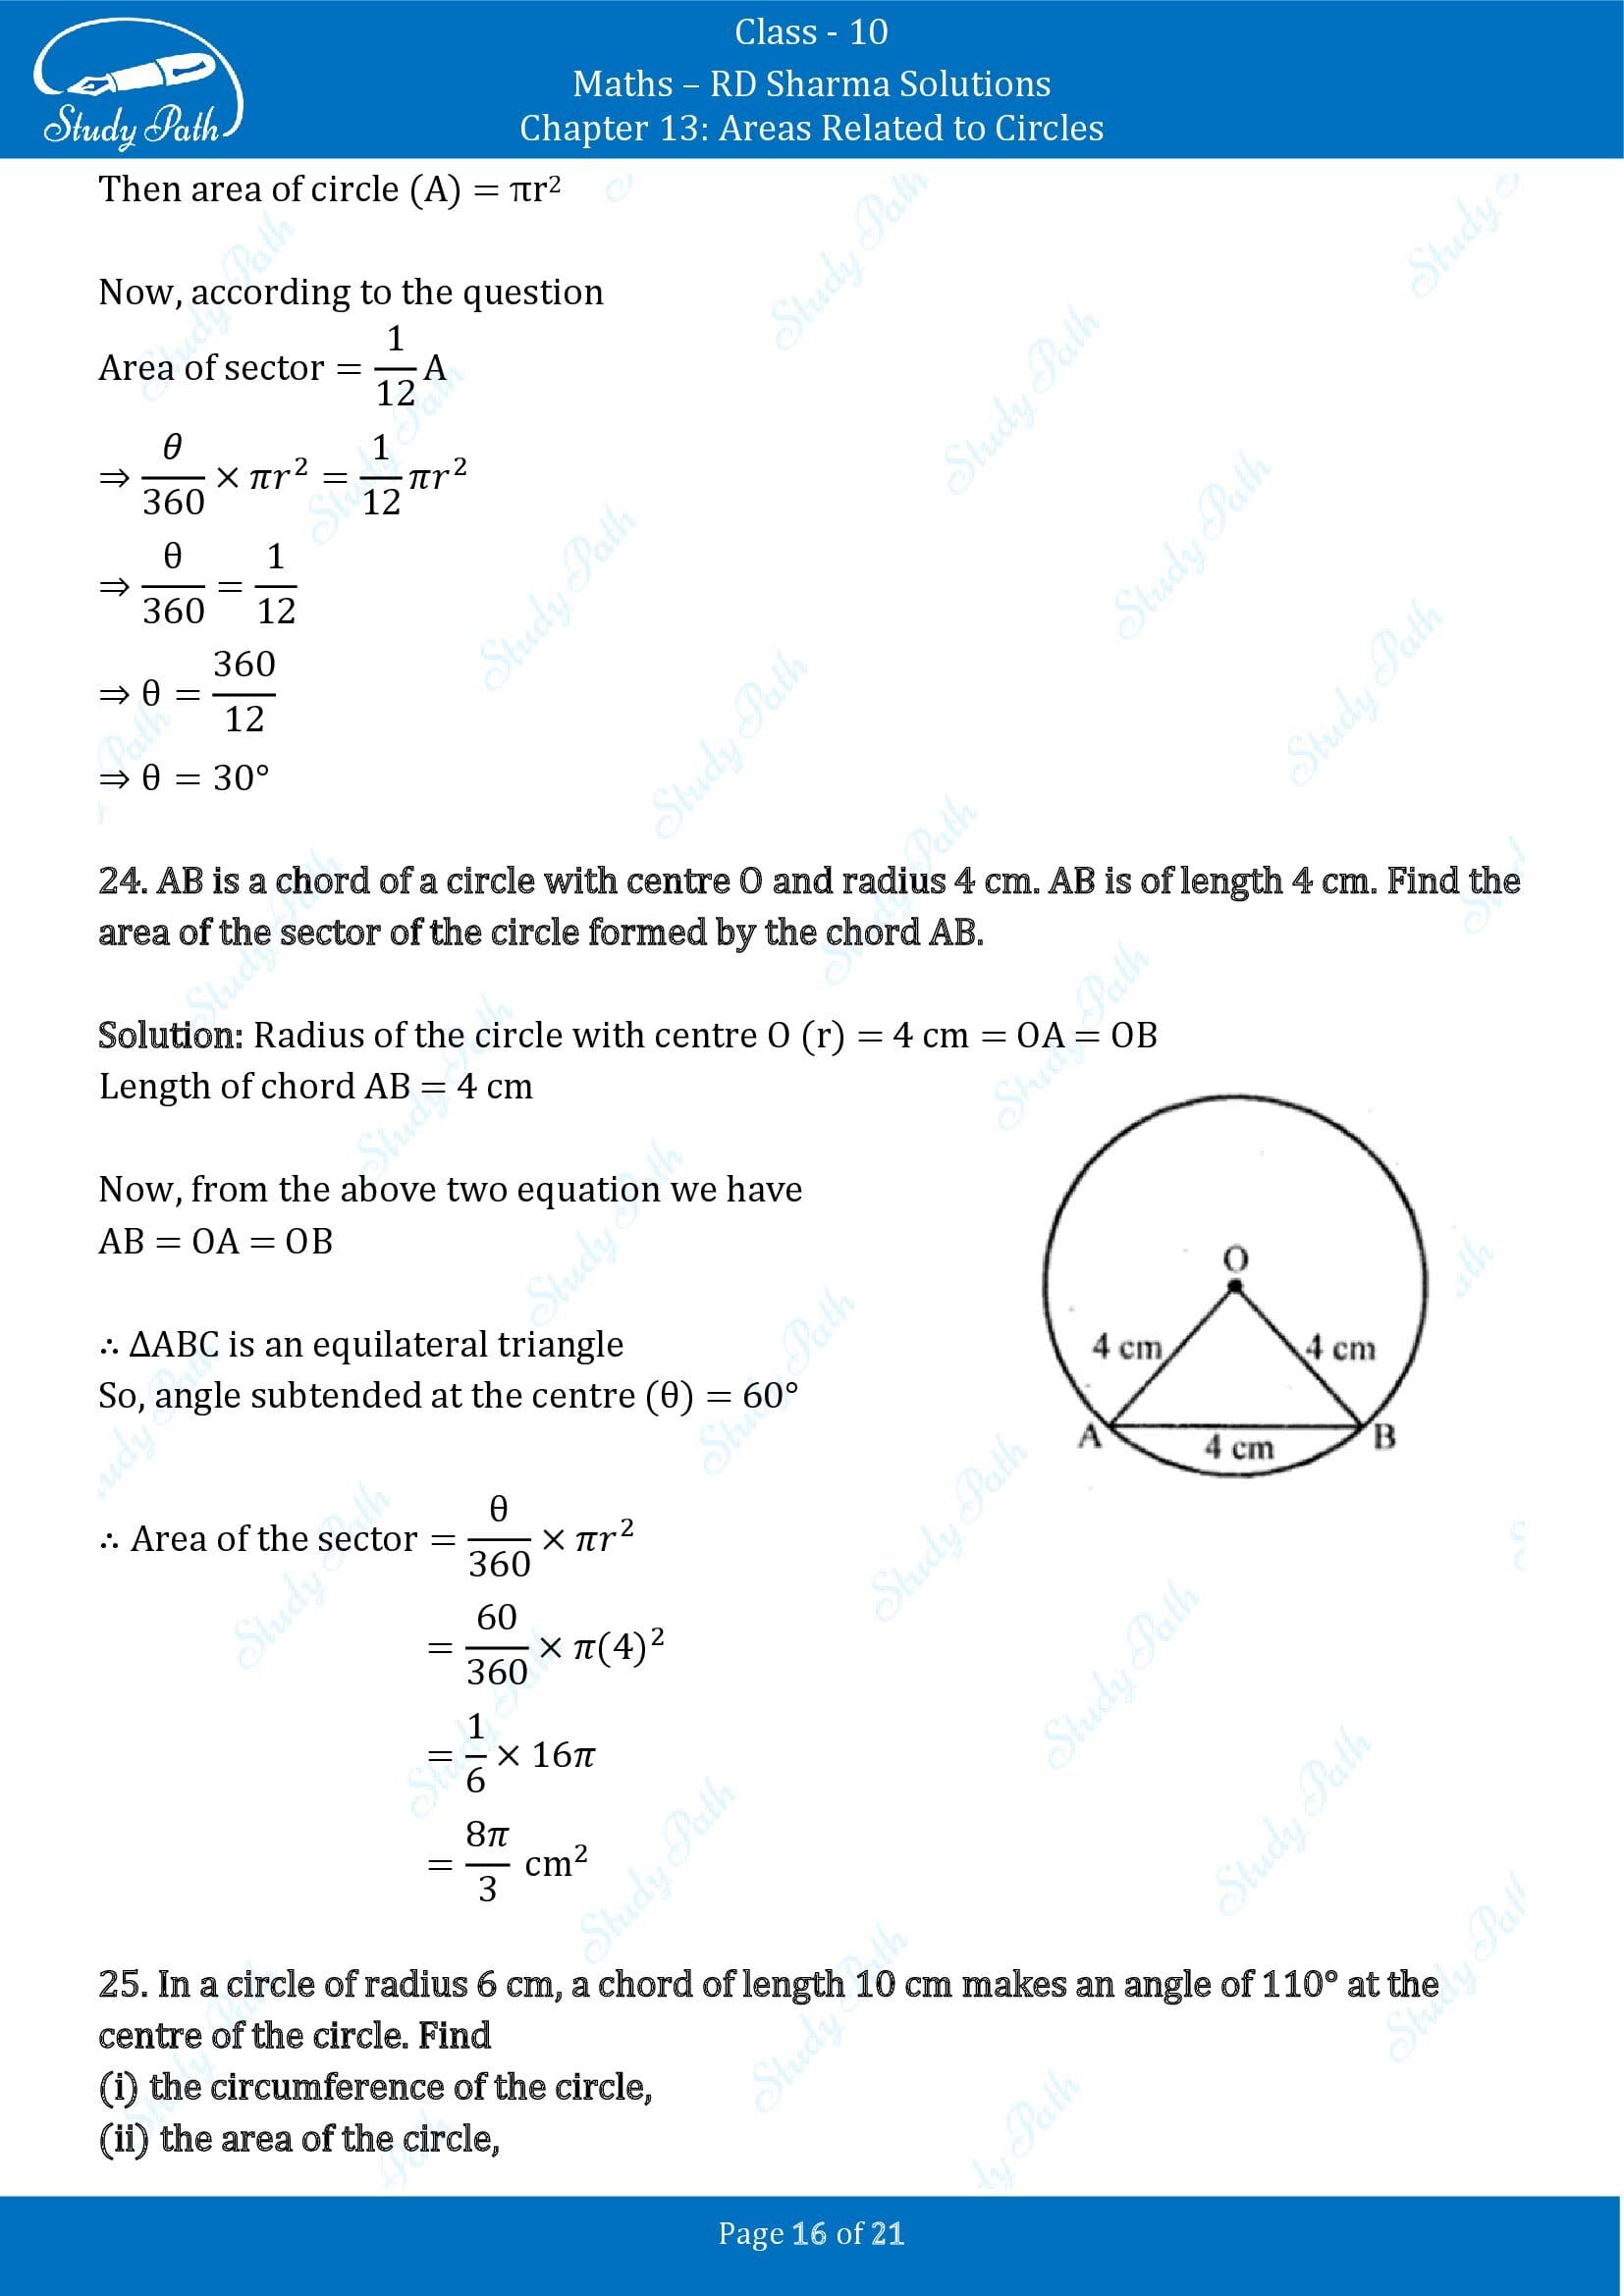 RD Sharma Solutions Class 10 Chapter 13 Areas Related to Circles Exercise 13.2 00016